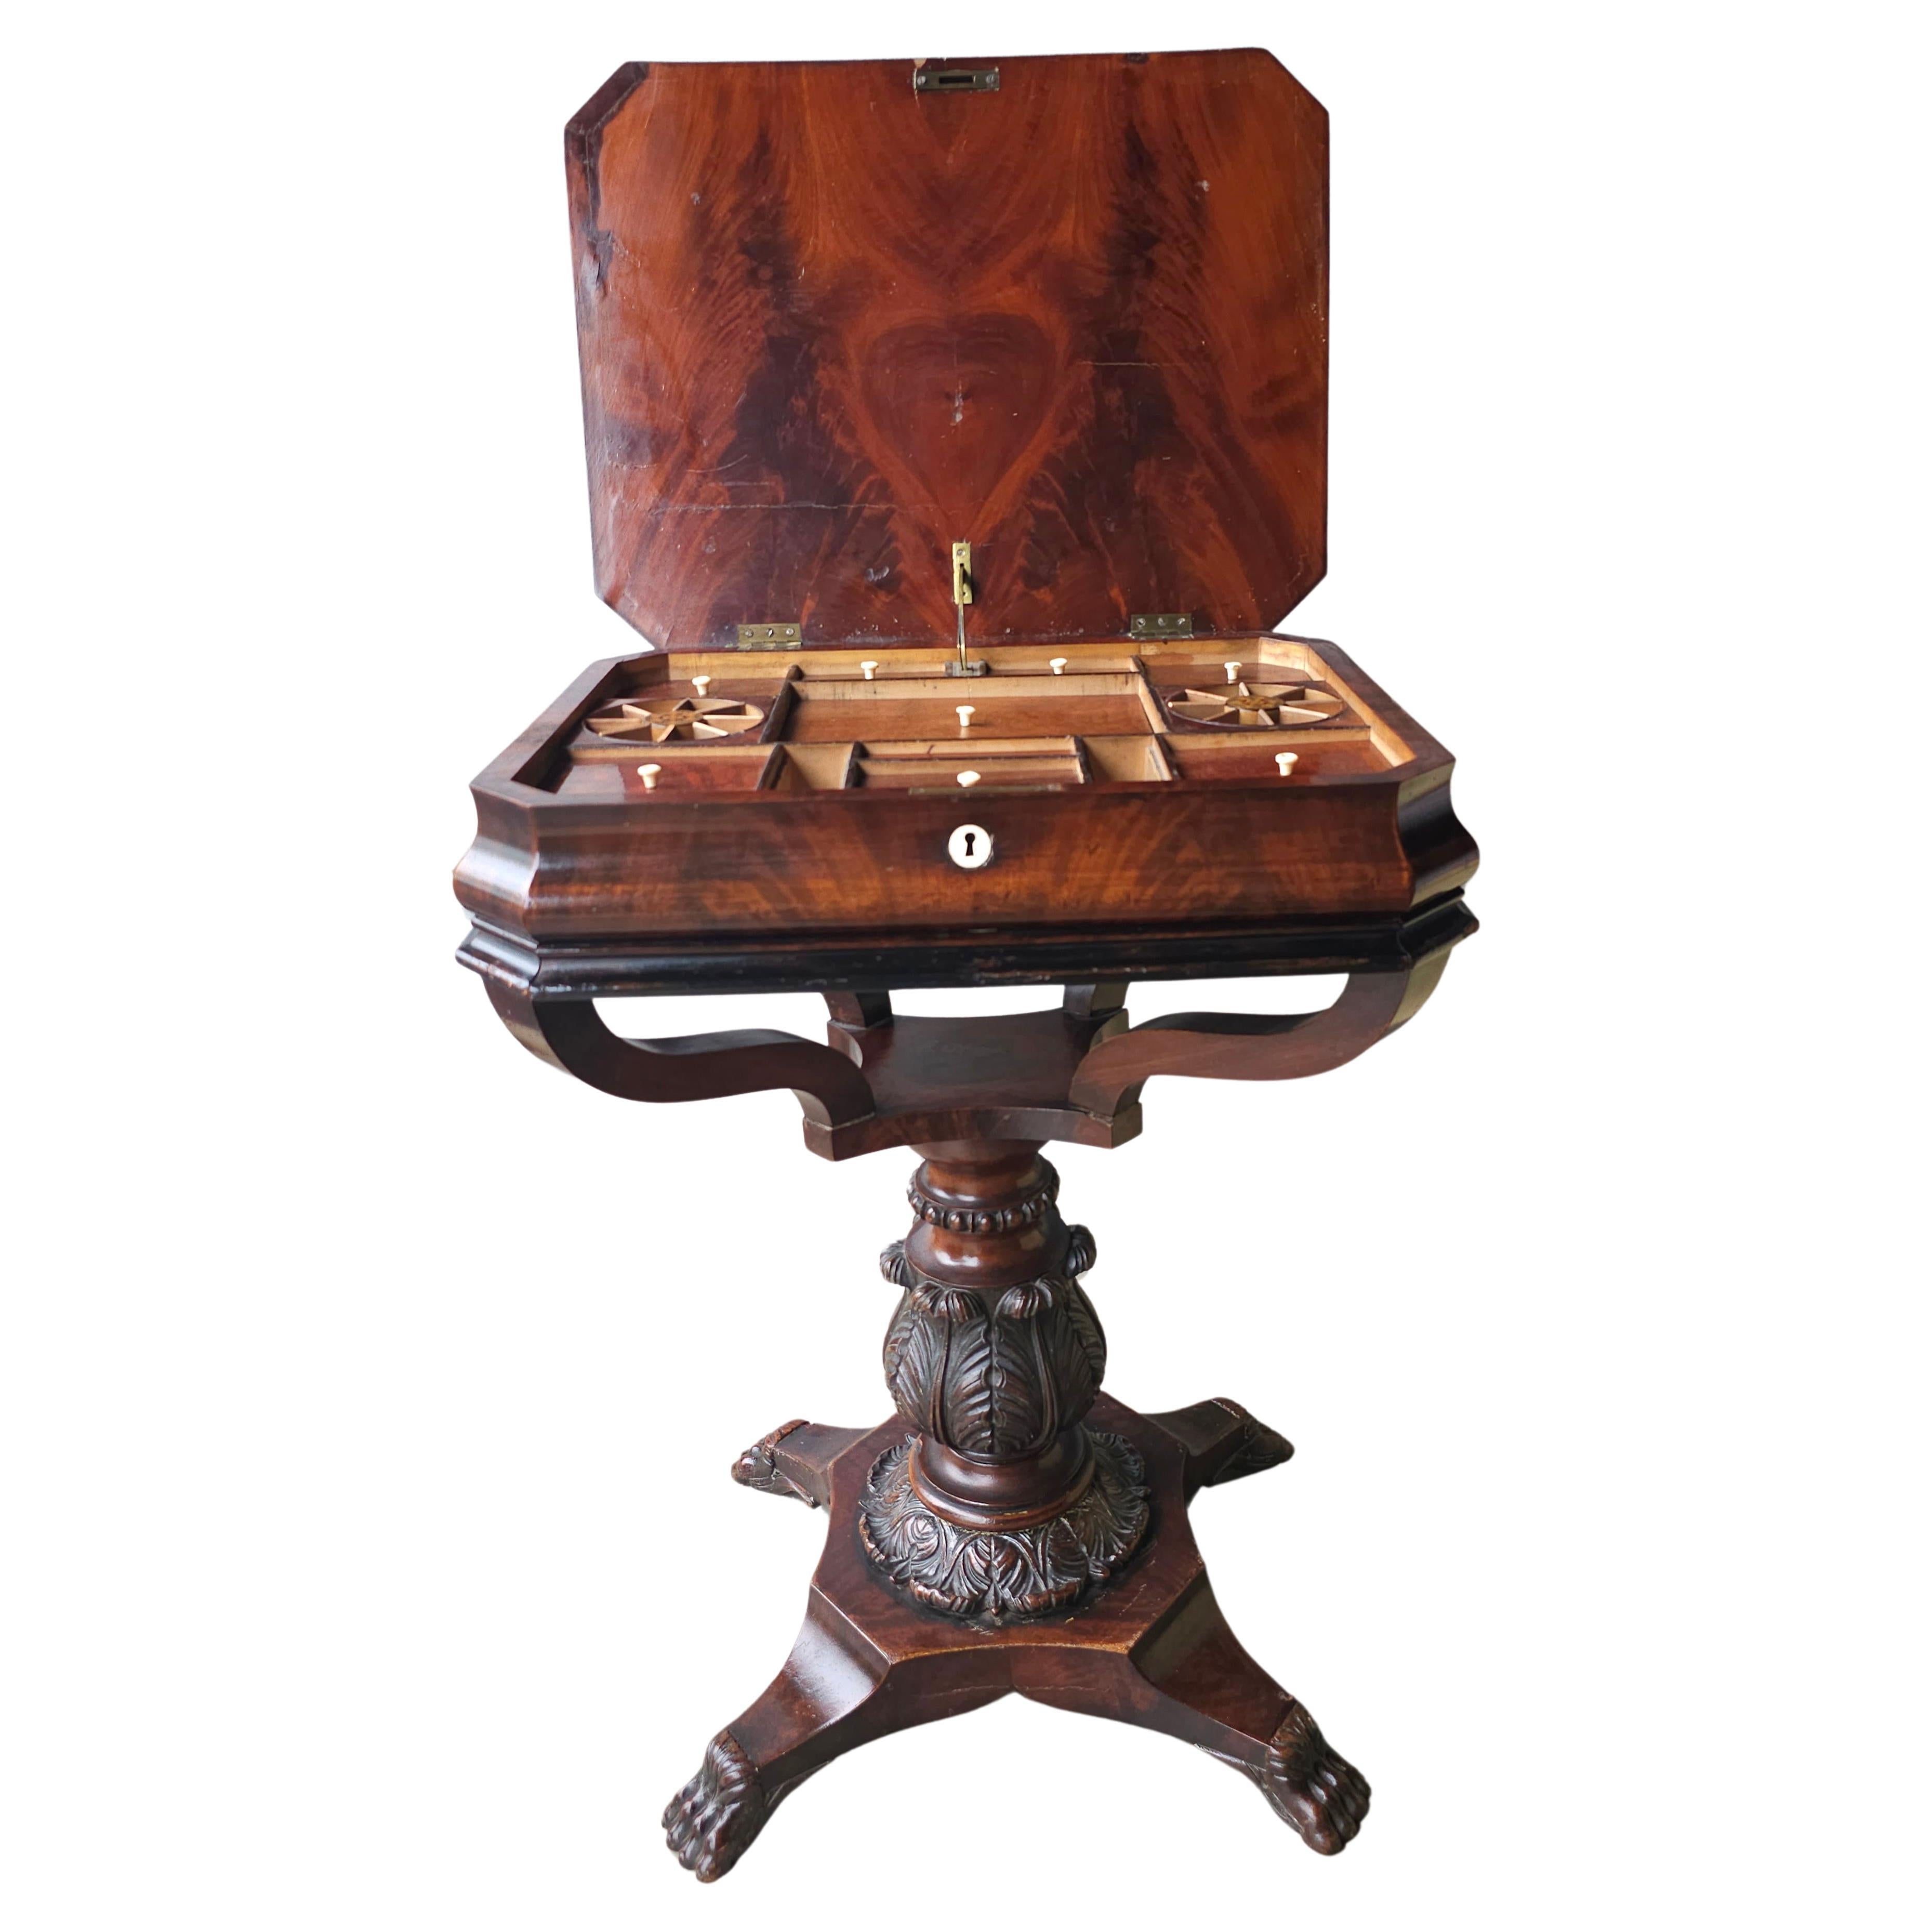 19th C. George IV Partial Ebonized Bookmatched And Carved Mahogany Sewing Stand In Good Condition For Sale In Germantown, MD